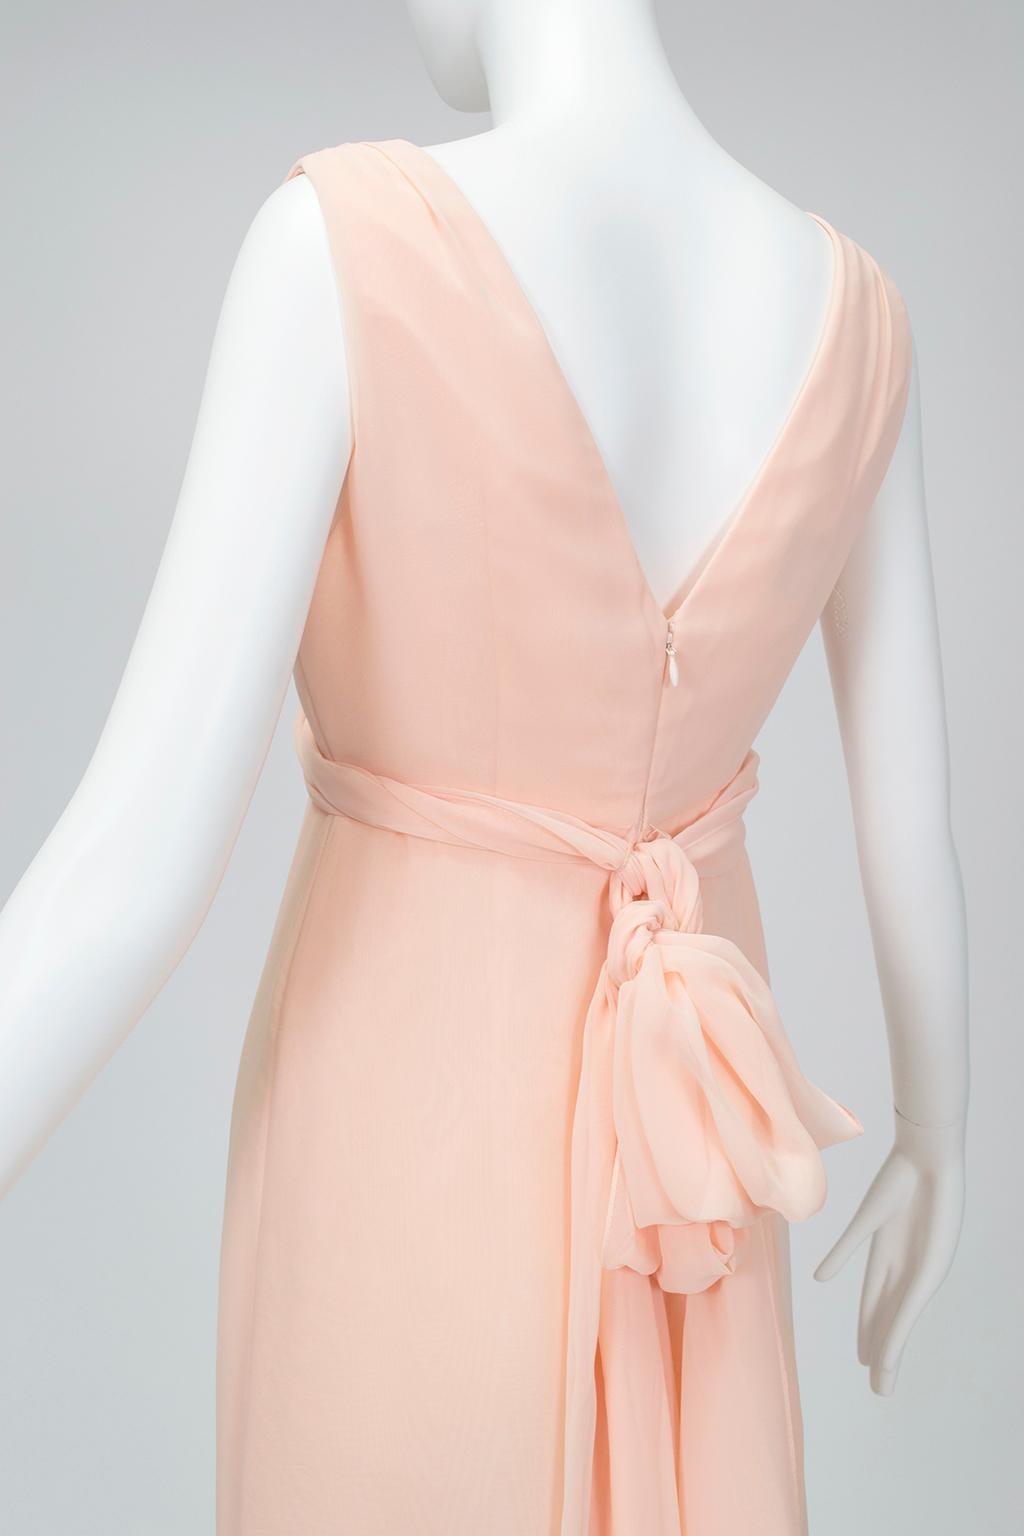 Vera Wang Blush Neoclassical Delphos Column Gown with Trailing Ties – S, 2008 For Sale 4